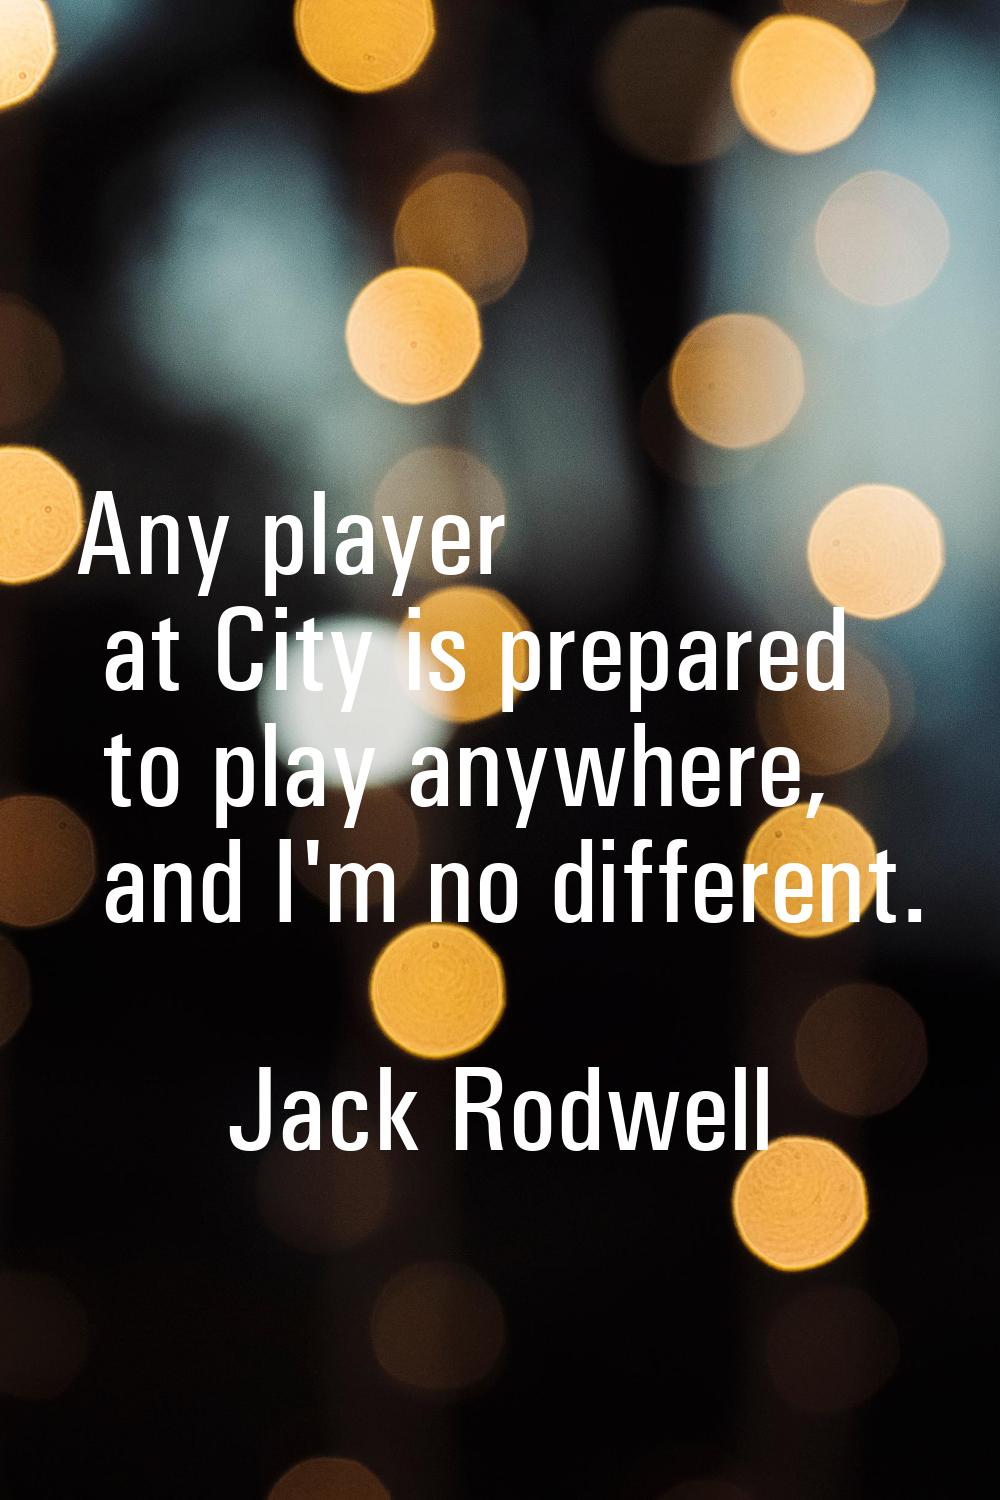 Any player at City is prepared to play anywhere, and I'm no different.